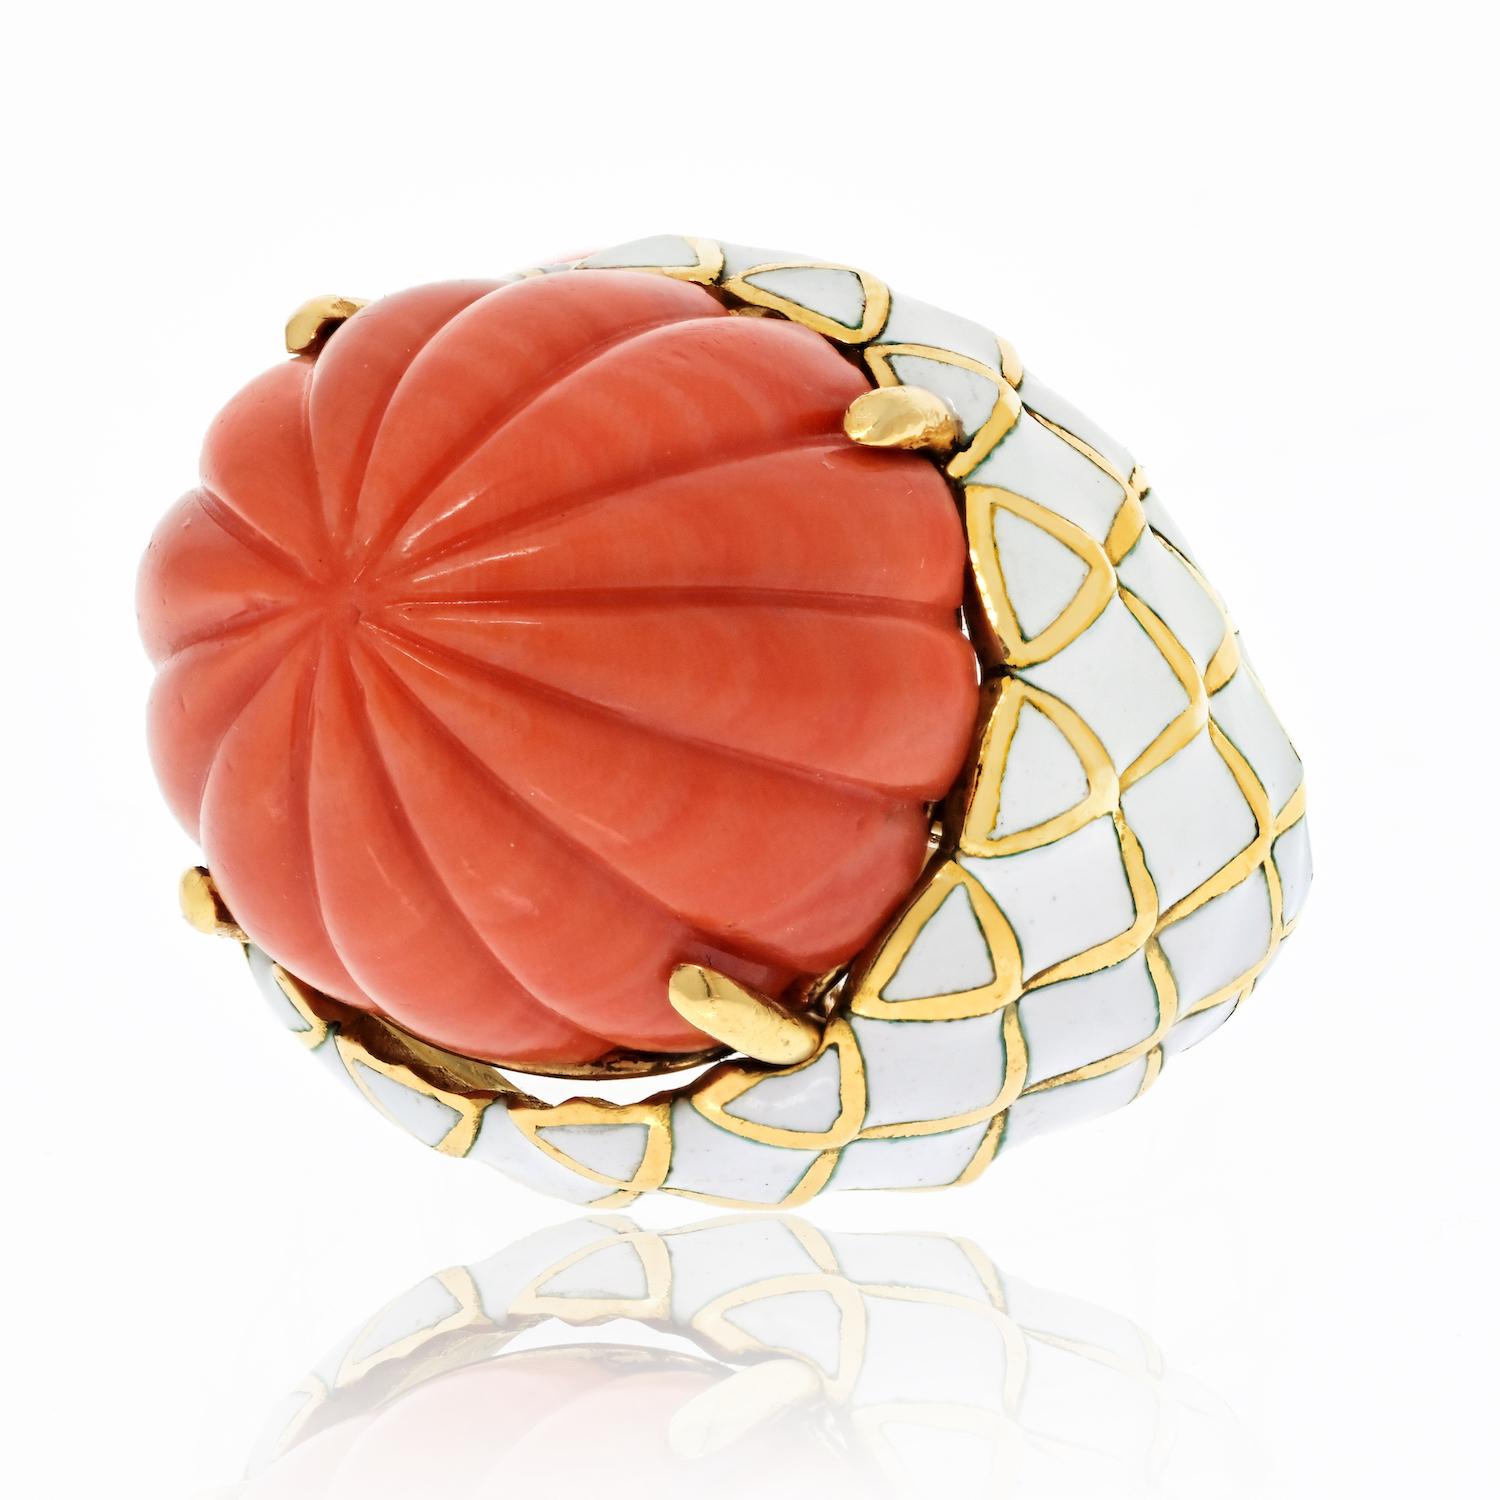 The 18k yellow gold ring by David Webb is a striking and unique piece of jewelry that showcases the exceptional craftsmanship and attention to detail for which the David Webb brand is known. This ring features a carved coral stone in the center,